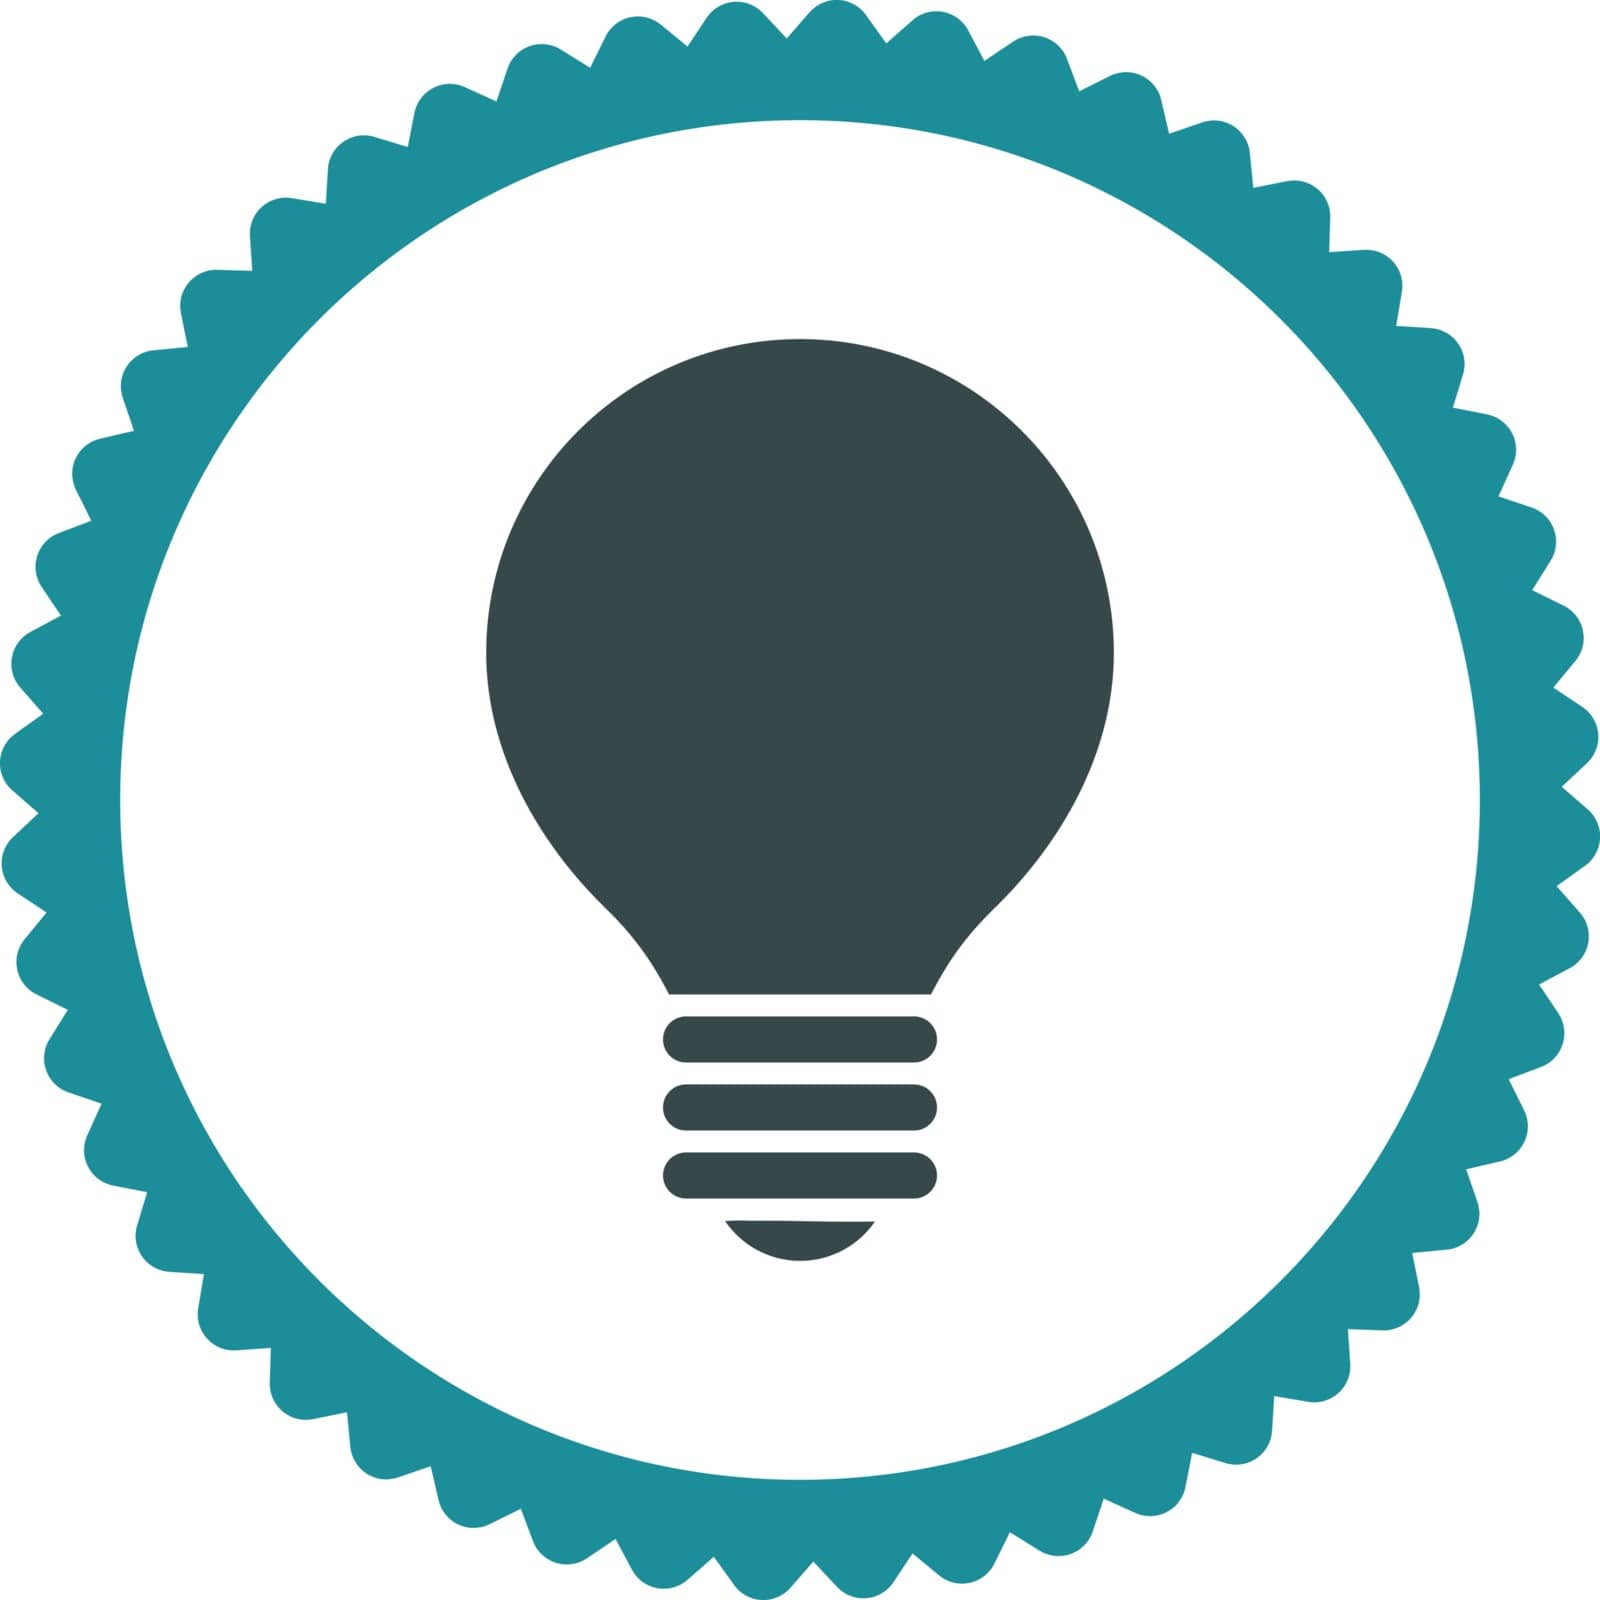 Electric Bulb flat soft blue colors round stamp icon by ahasoft